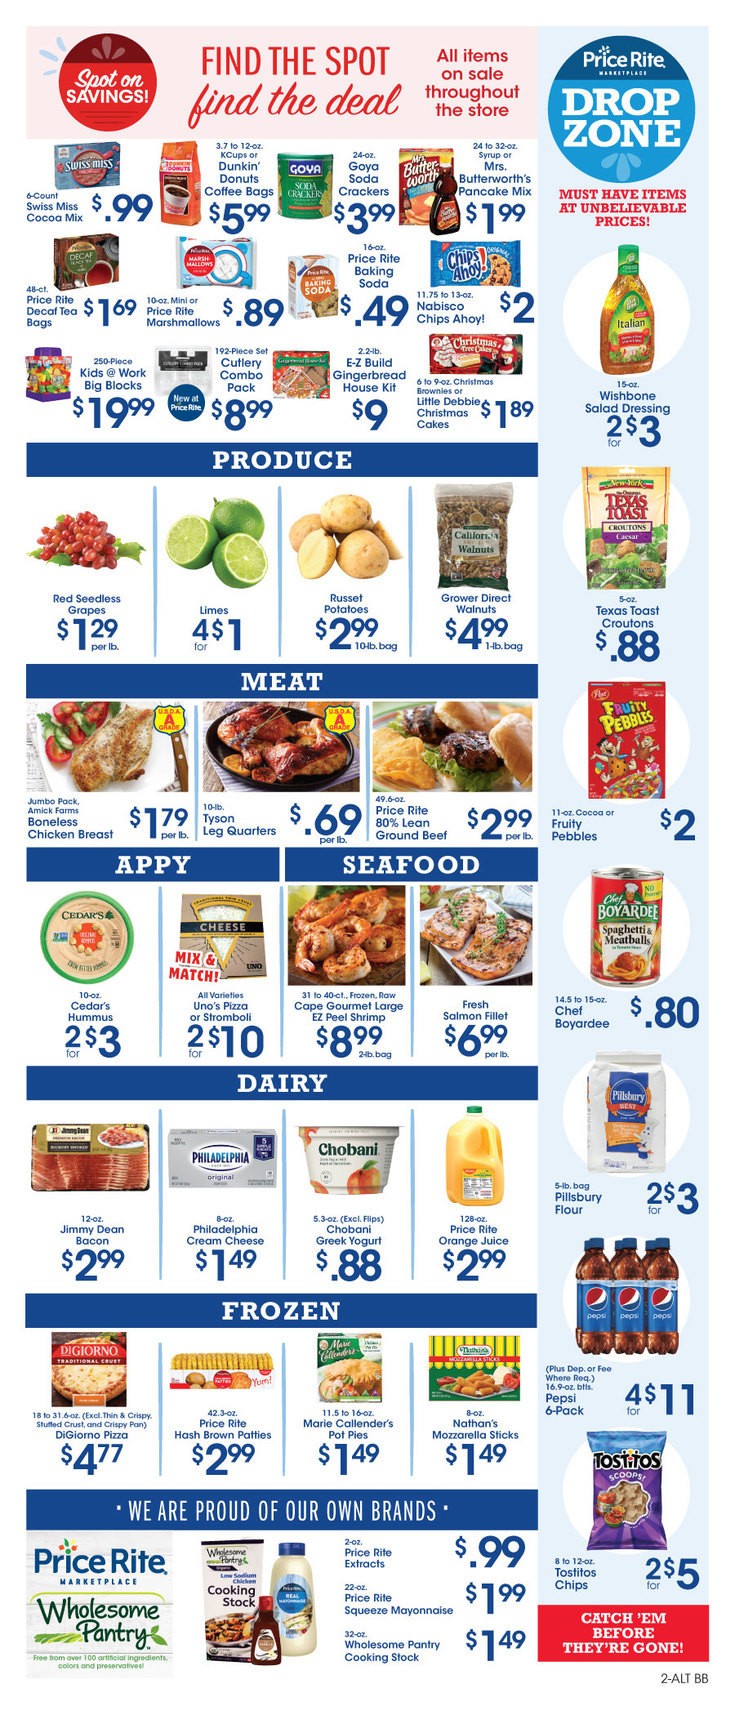 Price Rite Weekly Ad from December 6